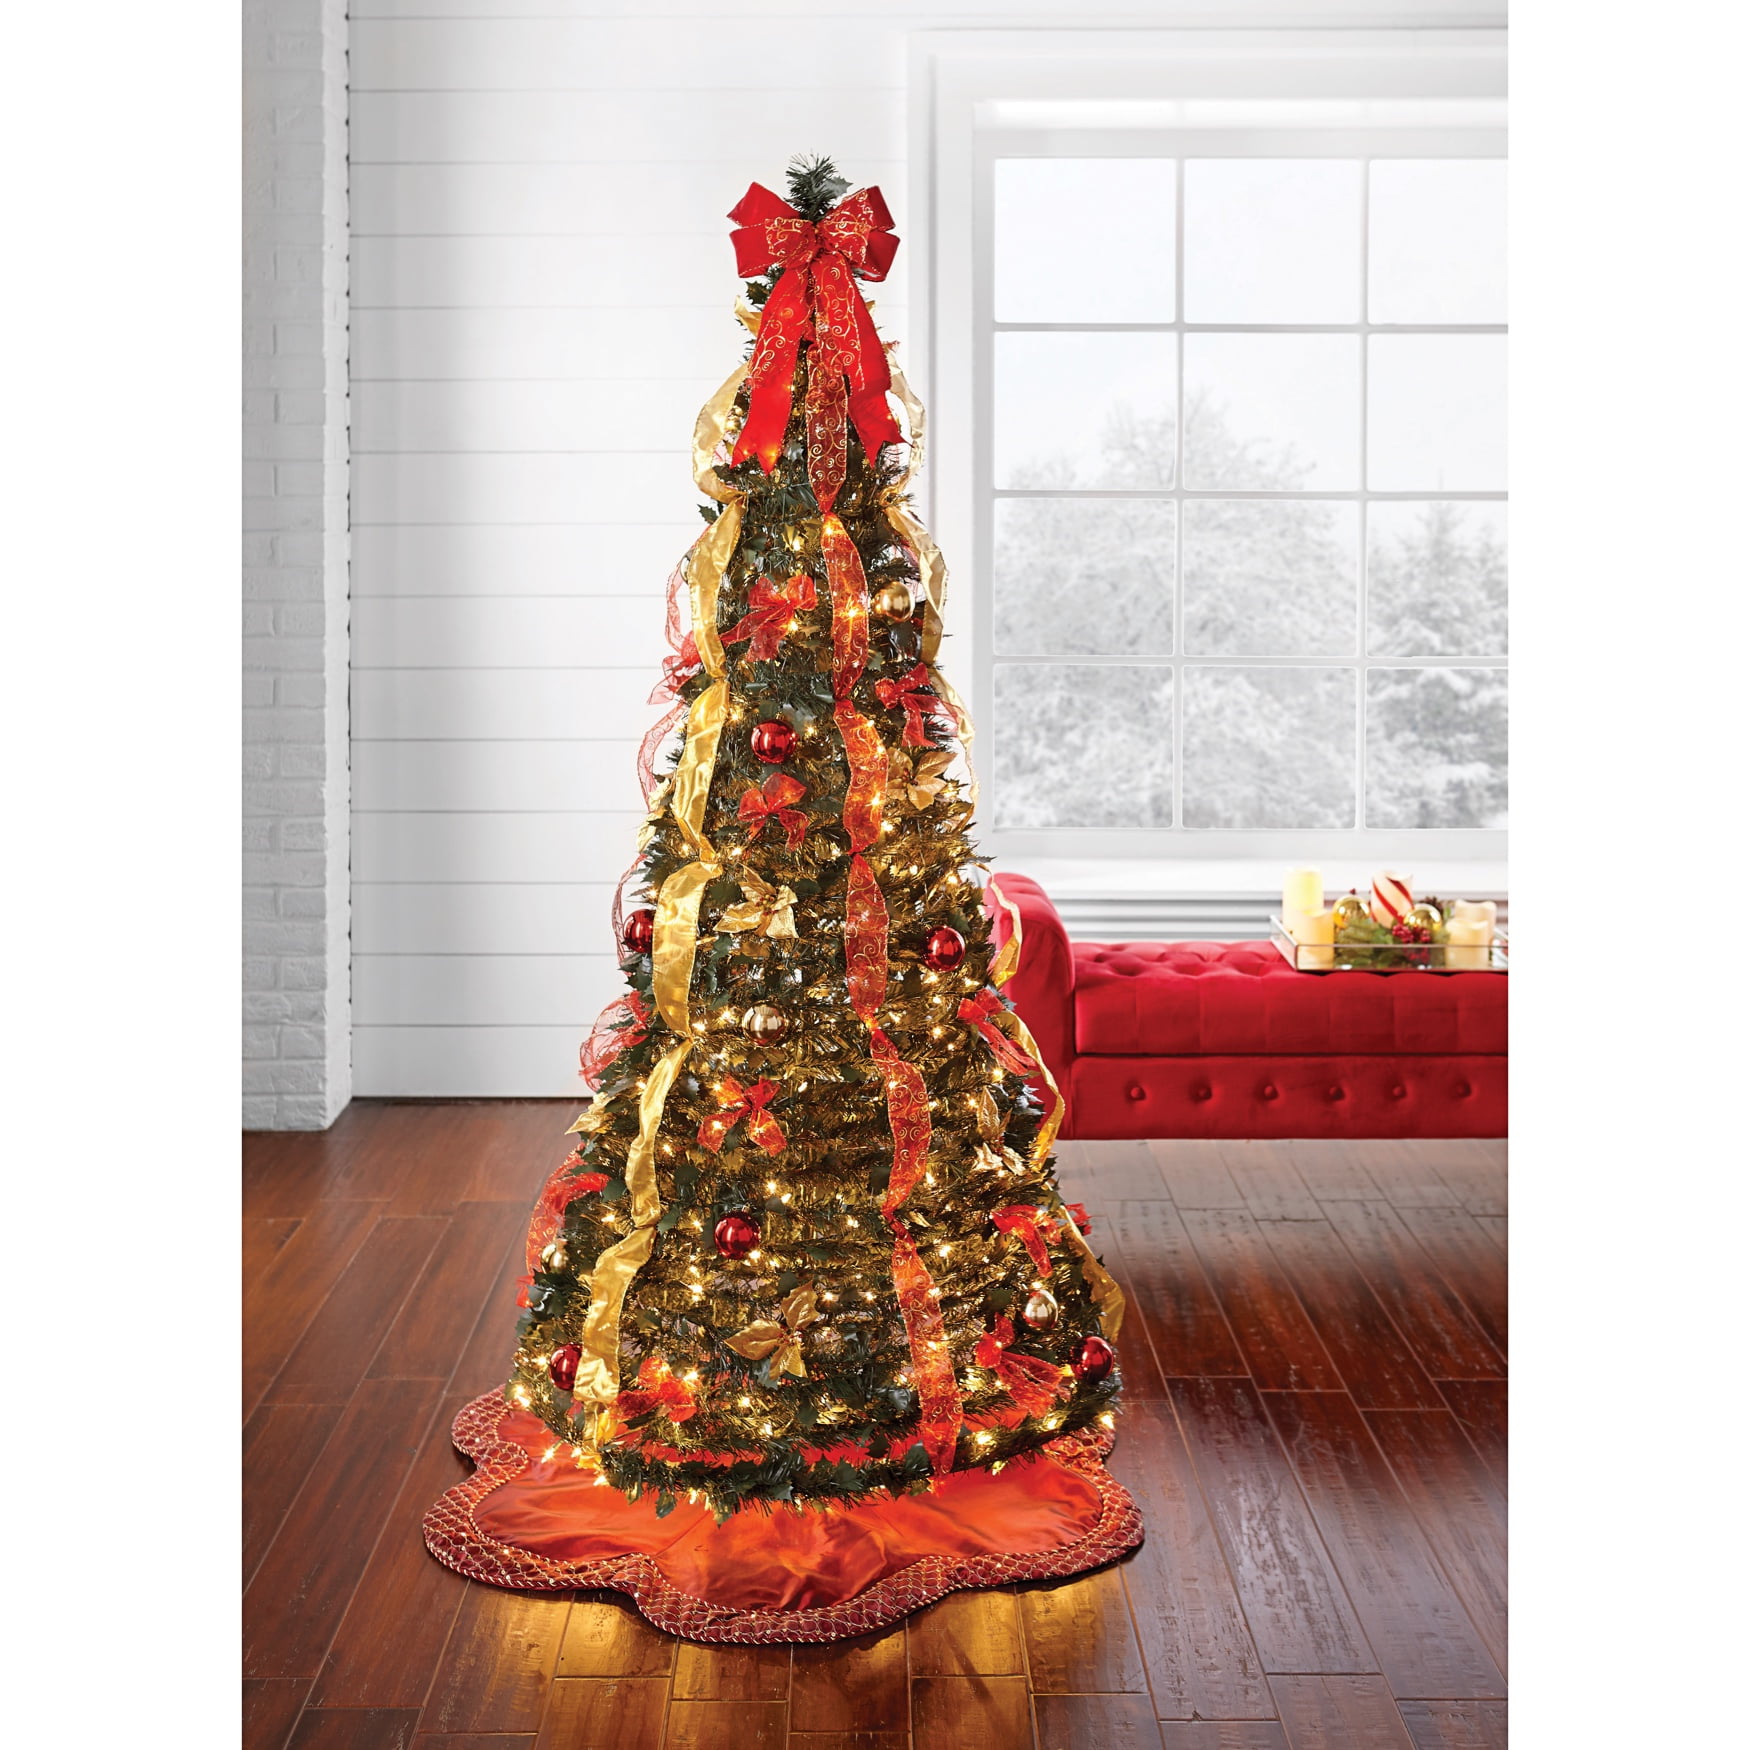 BrylaneHome Christmas Fully Decorated Pre-Lit 6-Ft. Pop-Up Christmas Tree Tree - Walmart.com